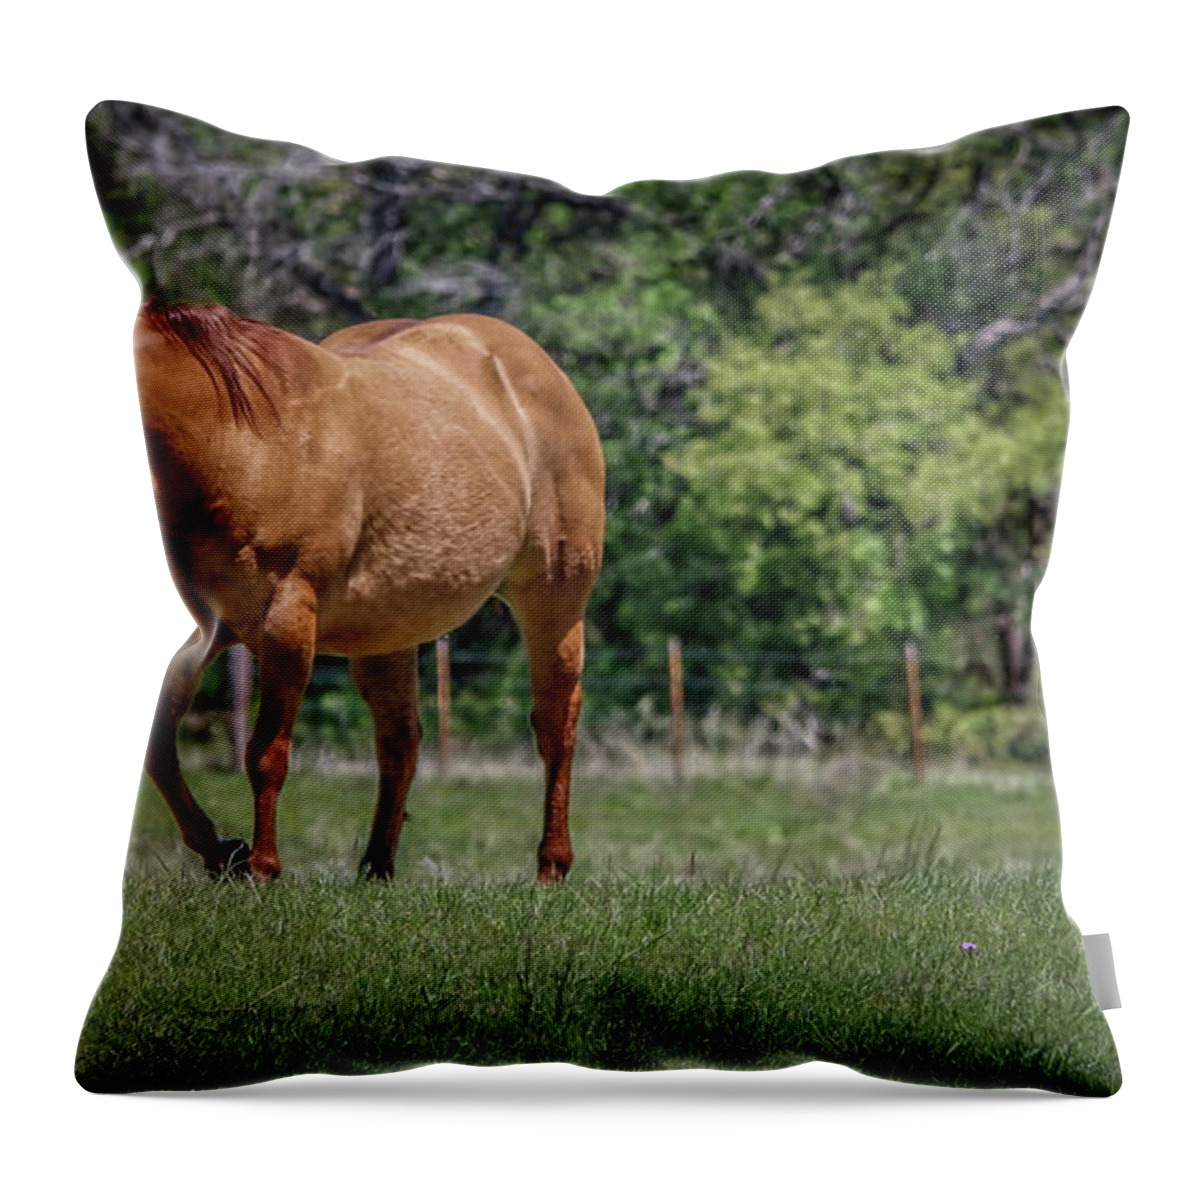 Horses Throw Pillow featuring the photograph Springtime In Texas Fields by Elaine Malott